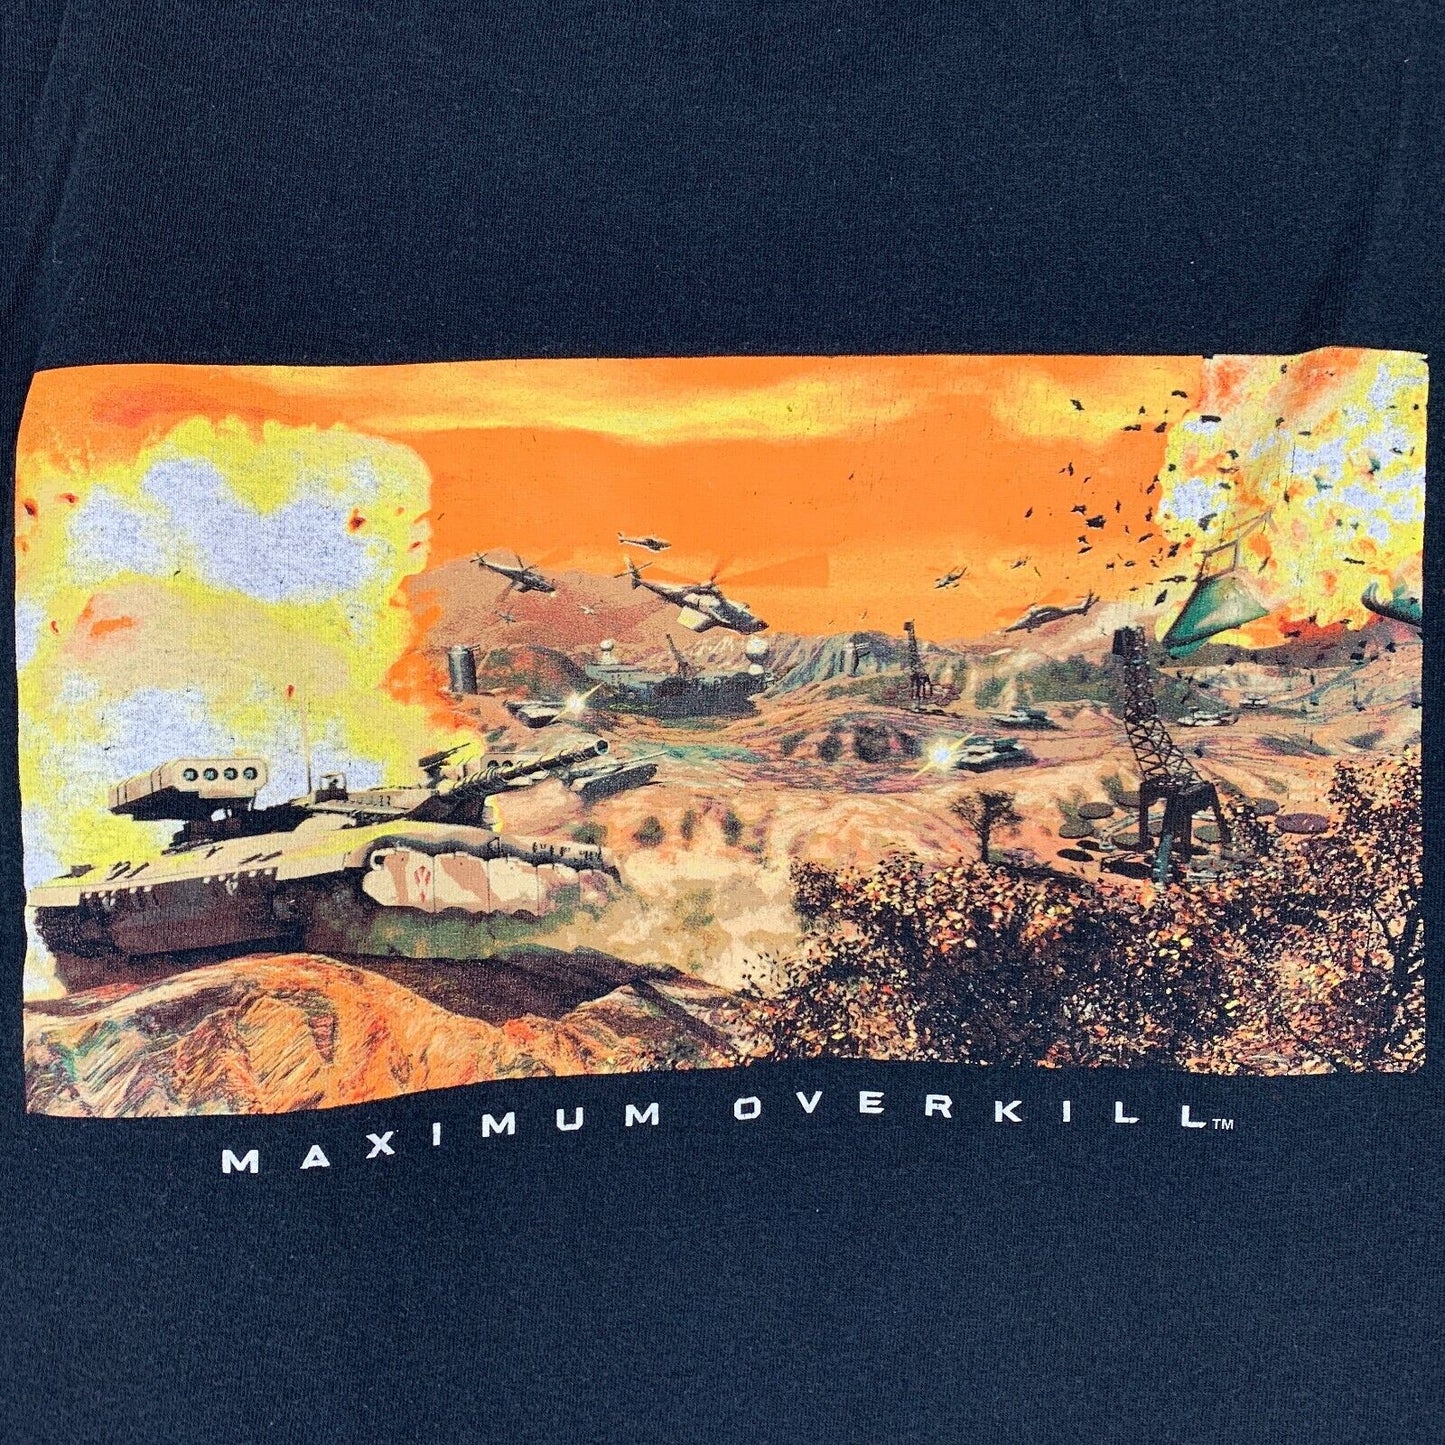 Comanche Maximum Overkill Vintage 90s T Shirt Helicopter Video Gamer Tee Large